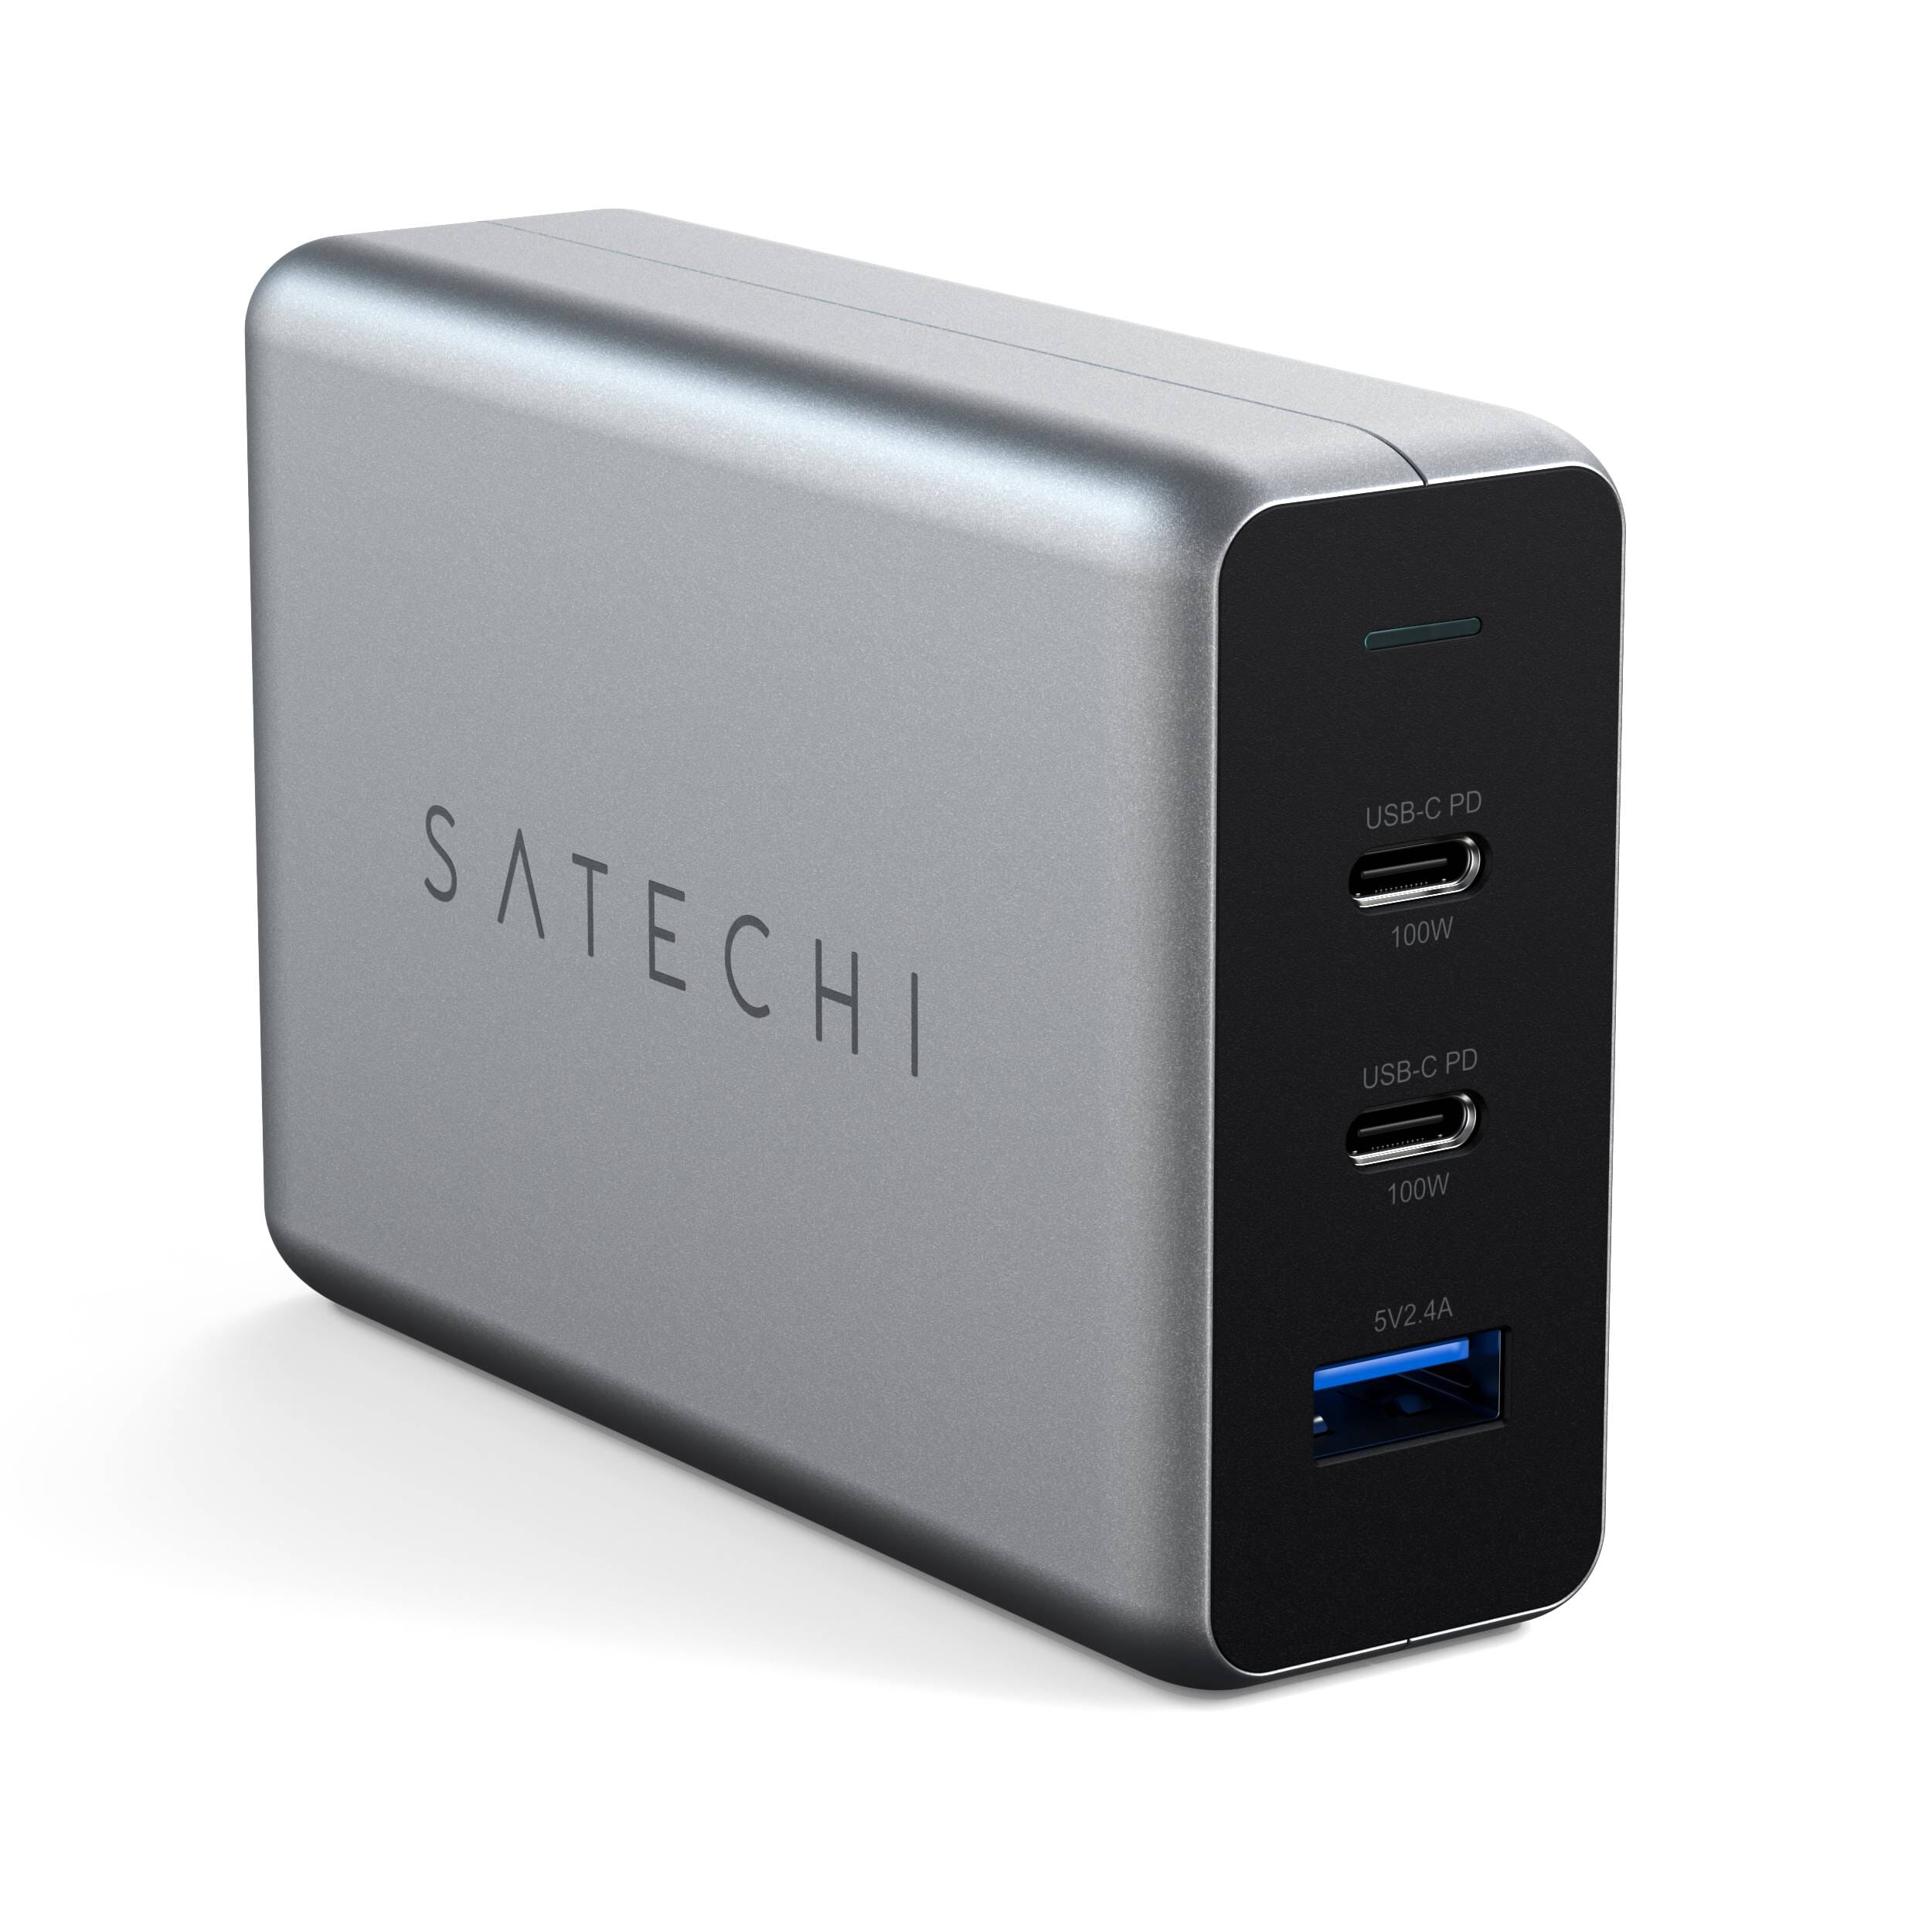 100W USB-C PD Compact Charger - GaN Charging - Satechi